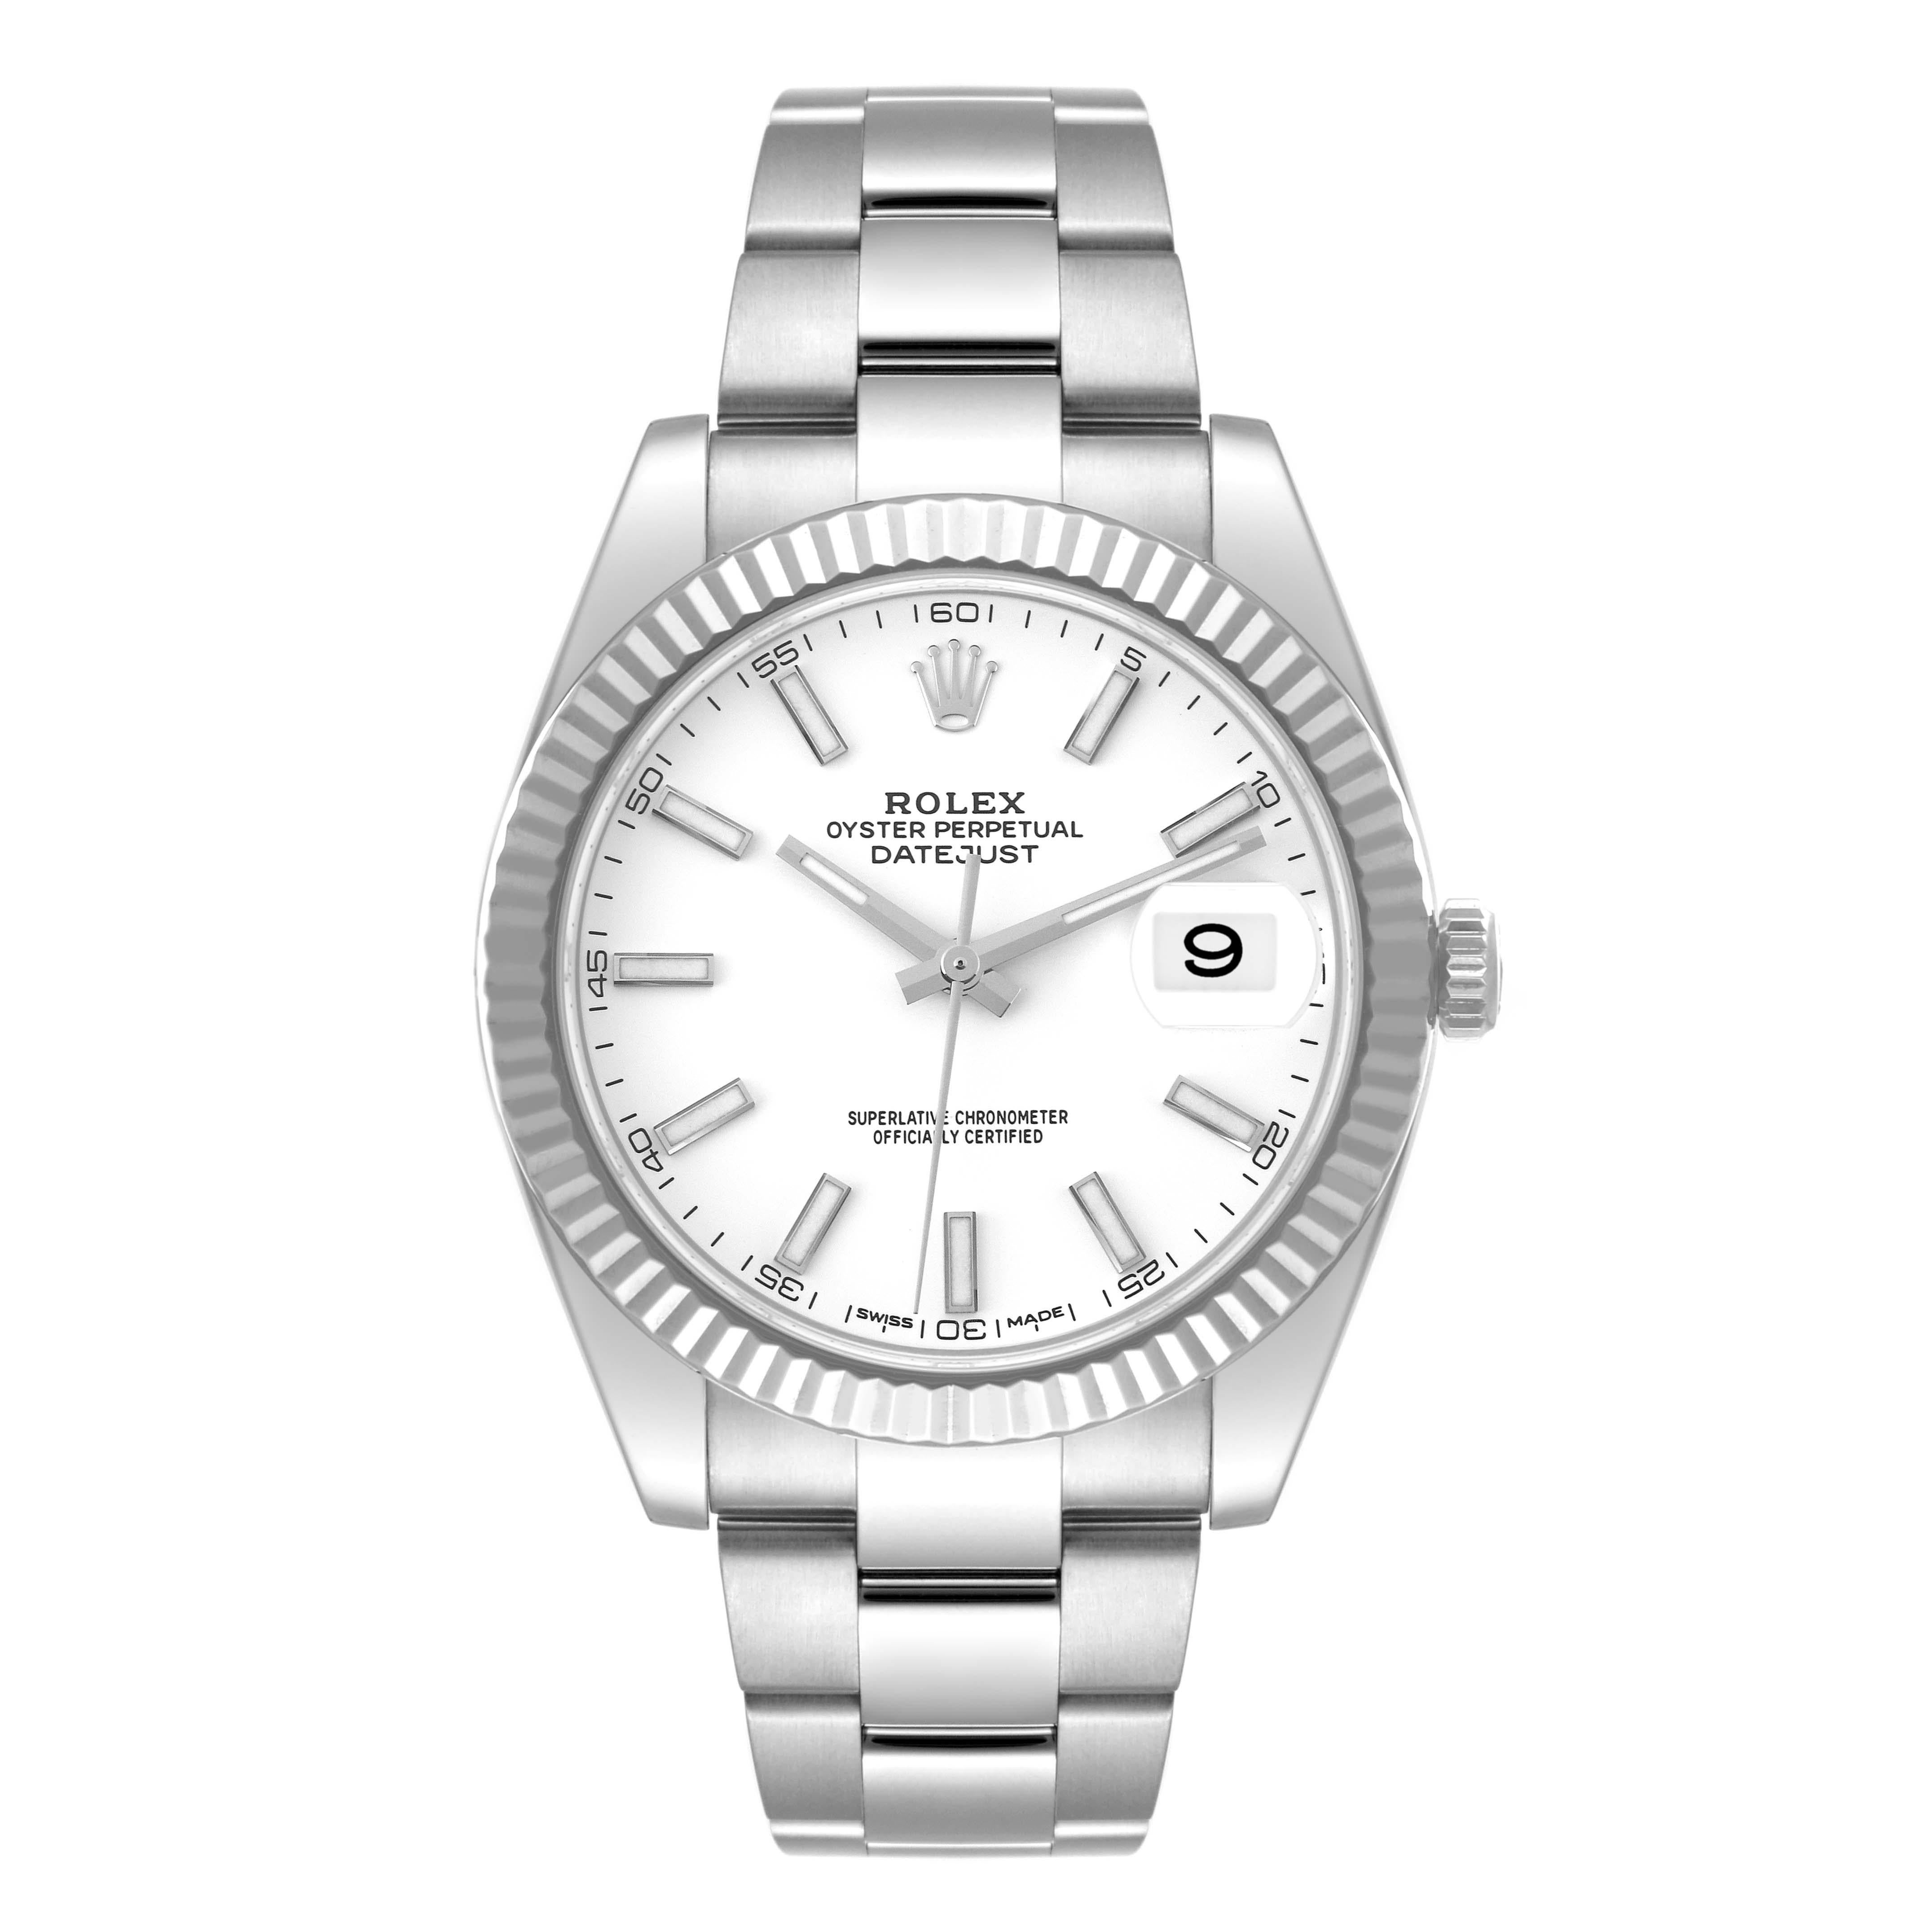 Rolex Datejust 41 Steel White Dial Oyster Bracelet Mens Watch 126334 Box Card. Officially certified chronometer automatic self-winding movement. Stainless steel case 41 mm in diameter. Rolex logo on the crown. 18K white gold fluted bezel. Scratch